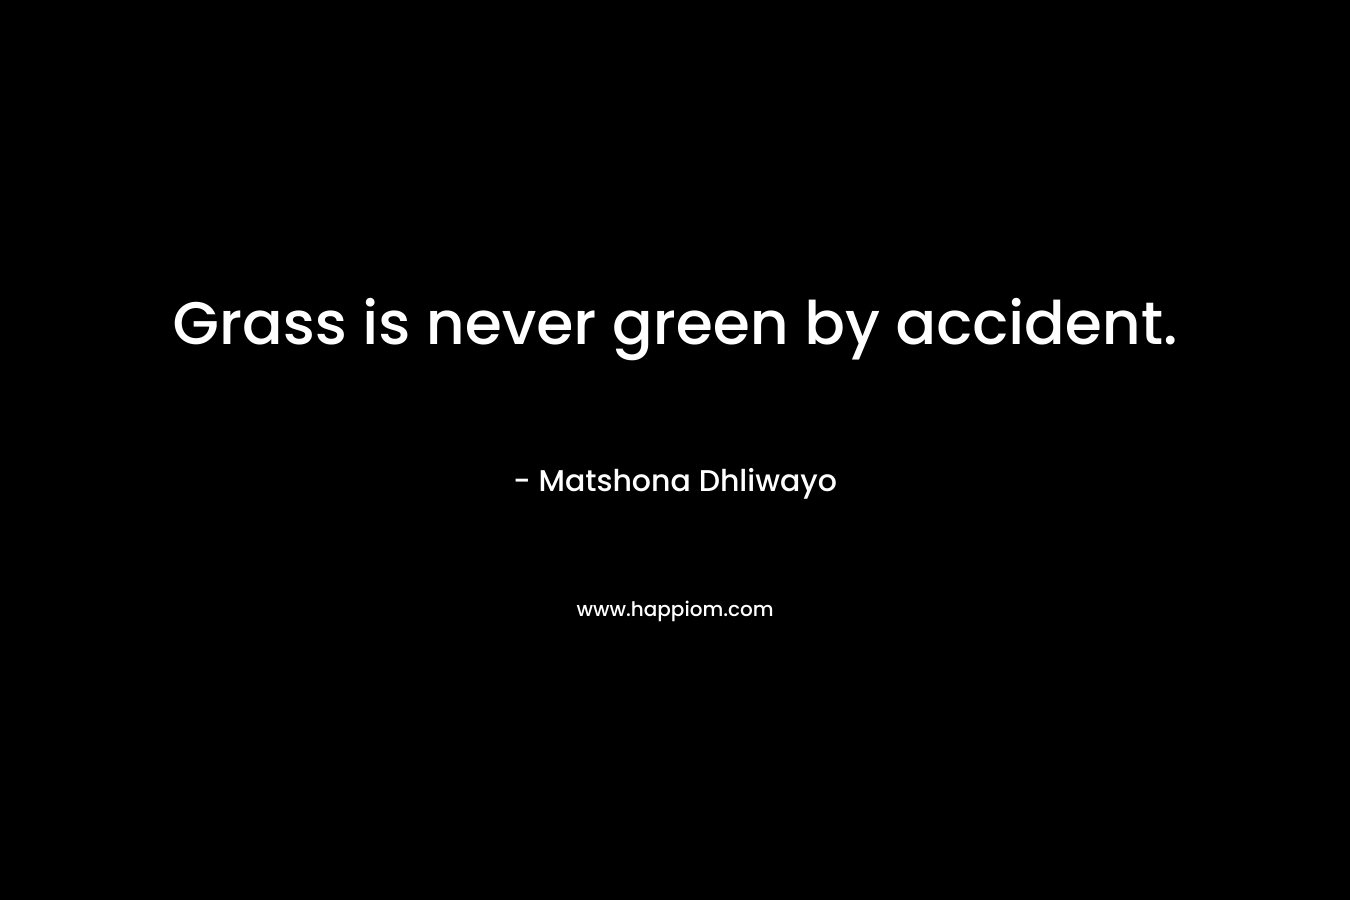 Grass is never green by accident.